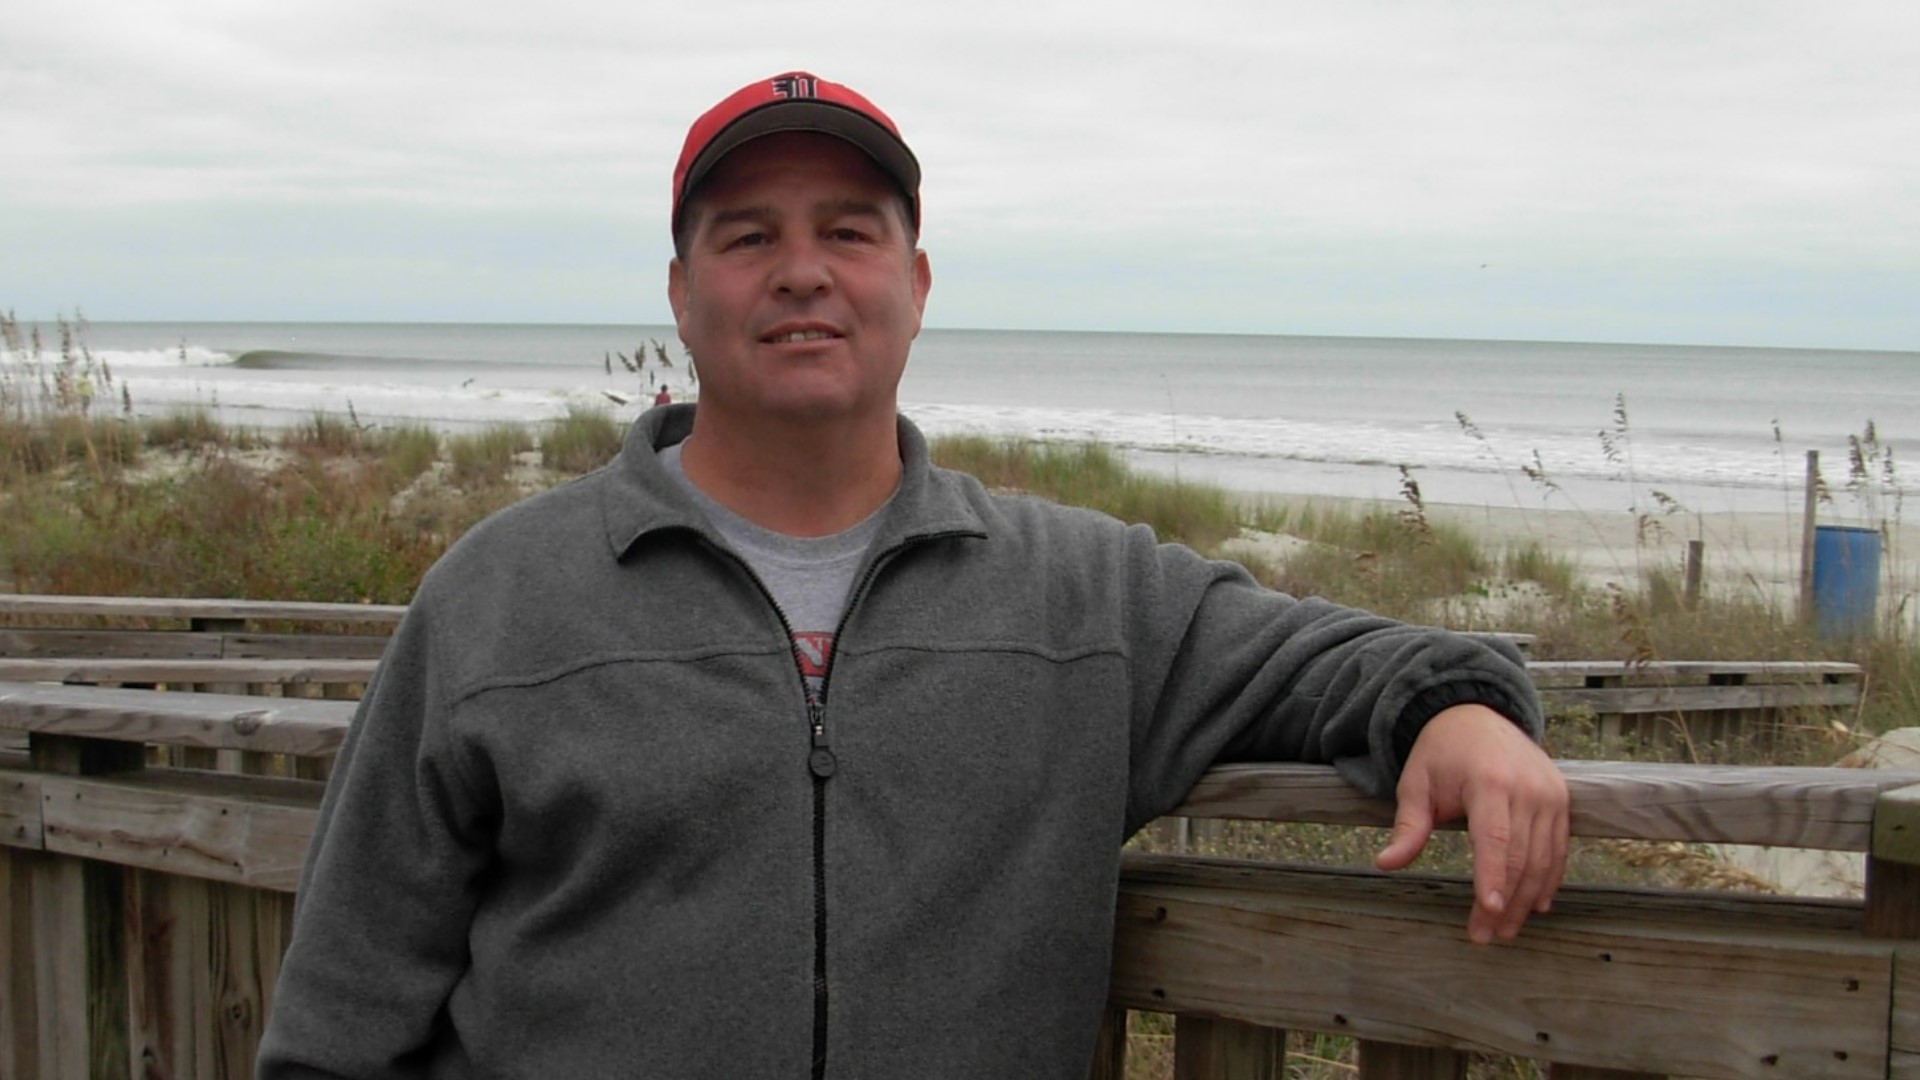 Paul Egleston died in his beach home on May 15. His daughter said it gives her comfort knowing how many current and former Northwest Guilford students loved him.